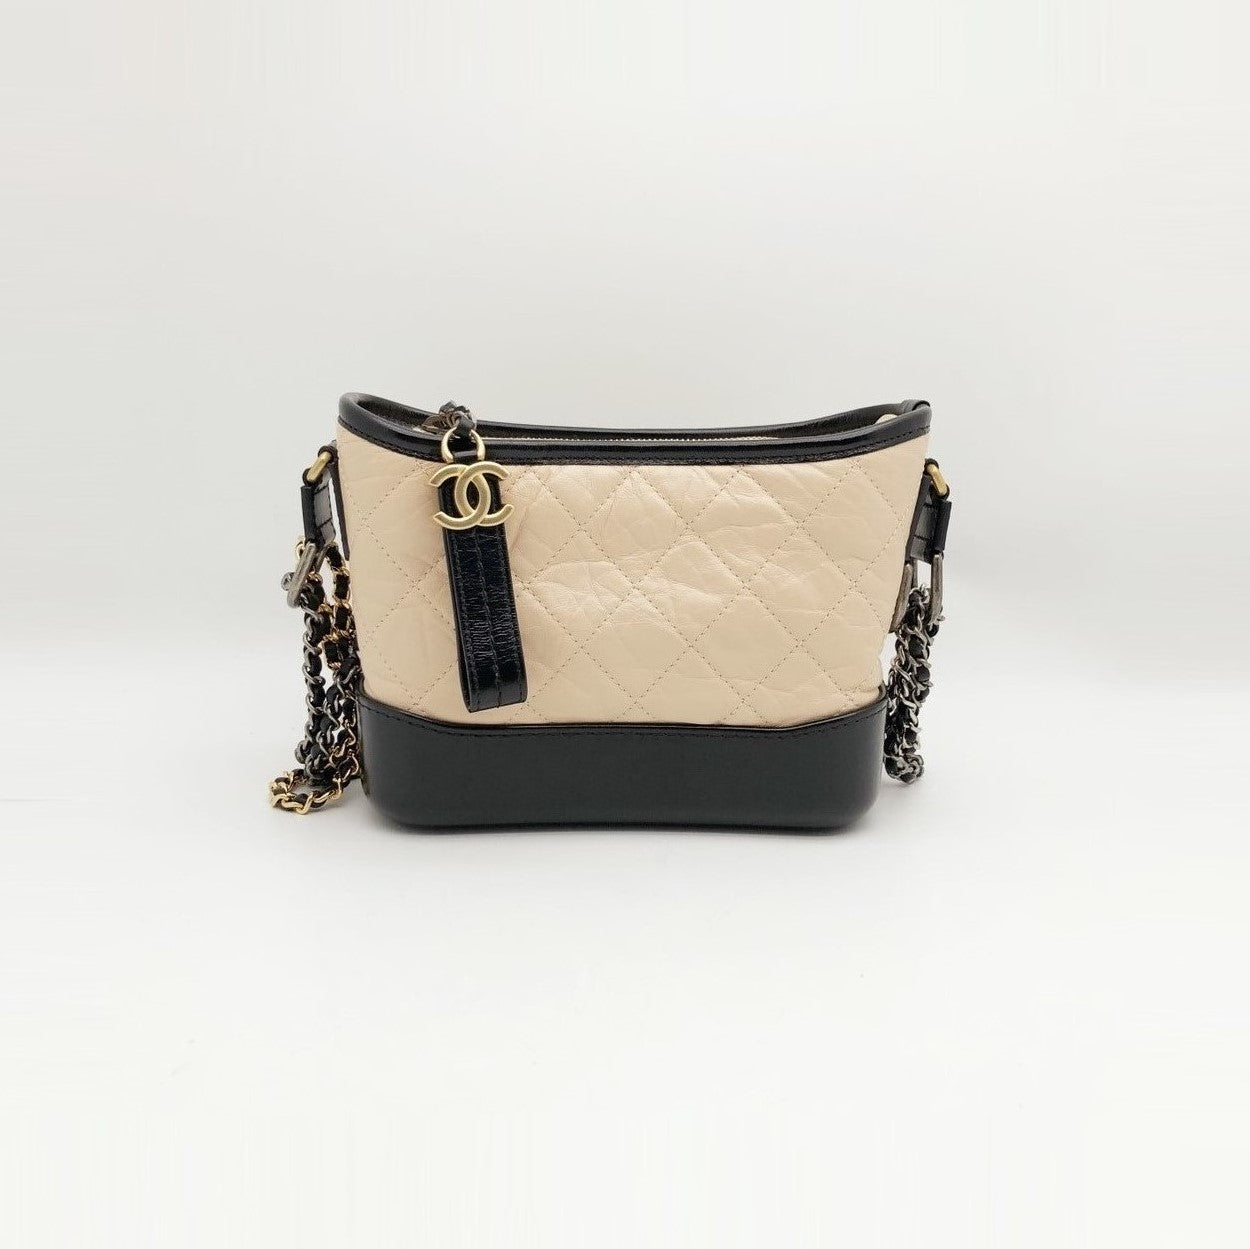 CHANEL Small Gabrielle Hobo Bag in Beige and Black